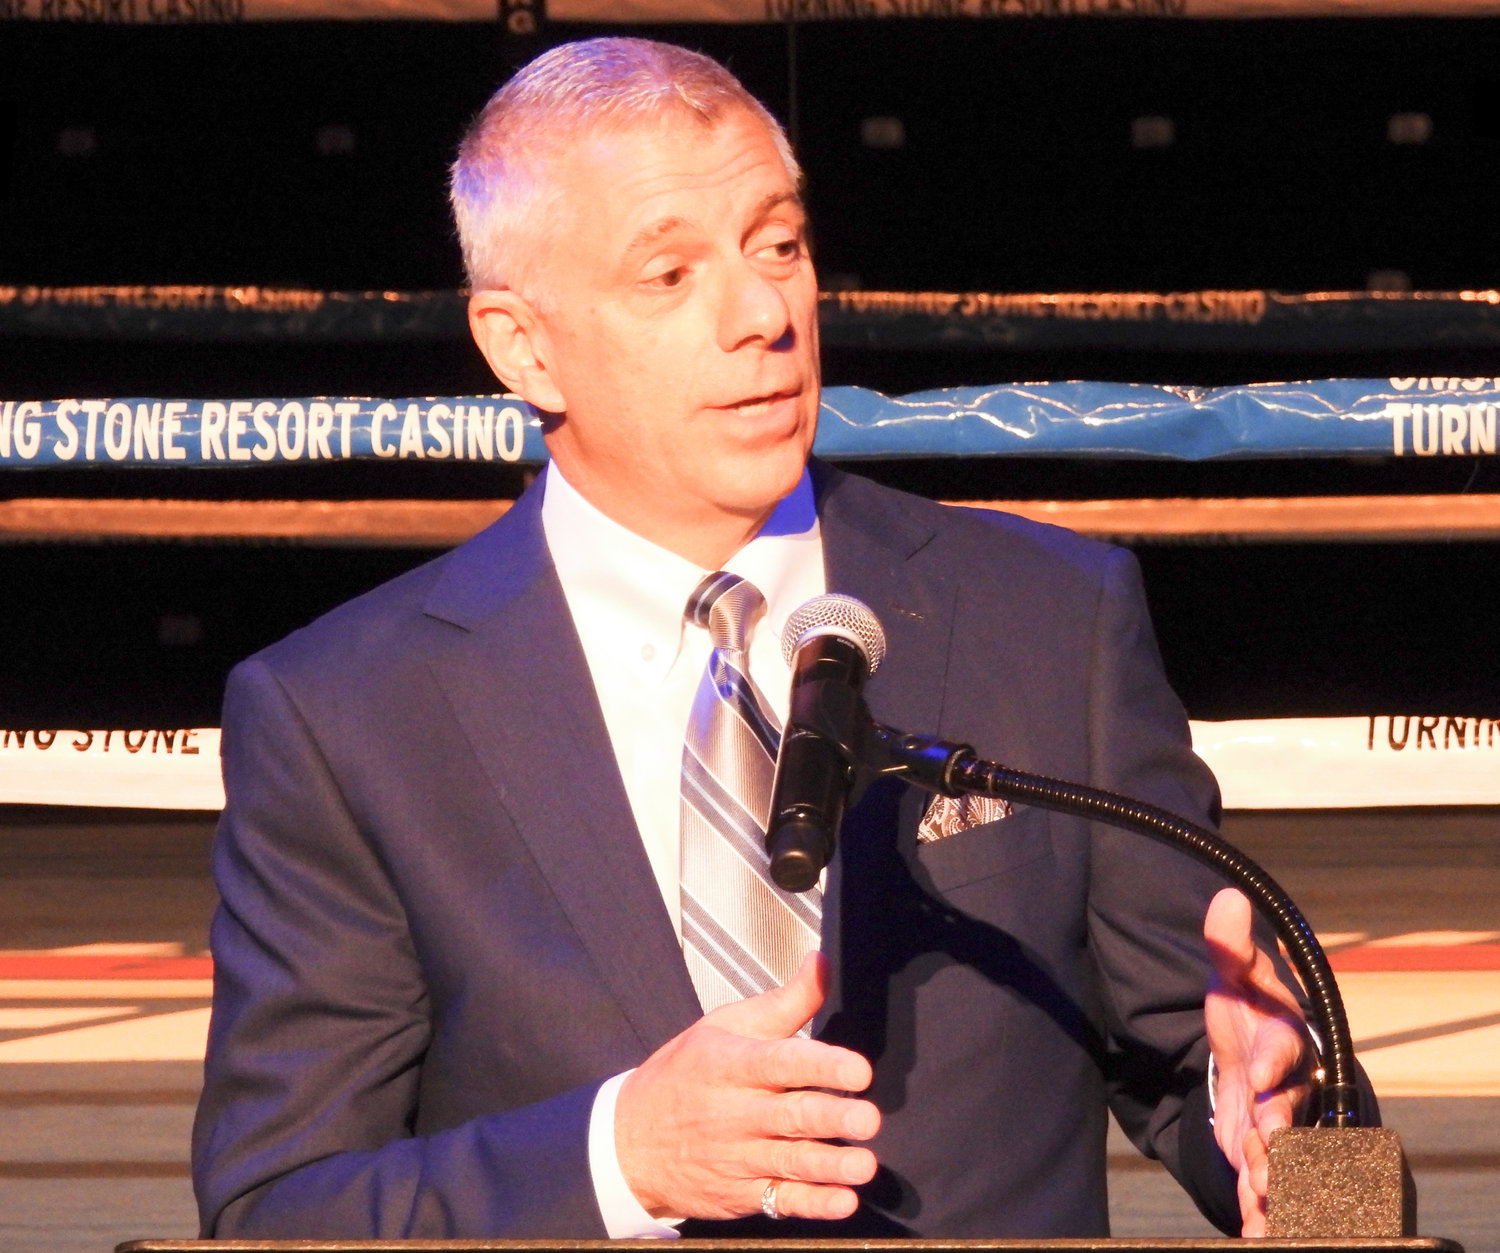 Oneida County Executive Anthony Picente speaks at a press conference on Thursday at the Turning Stone, kicking off the Boxing Hall of Fame Weekend